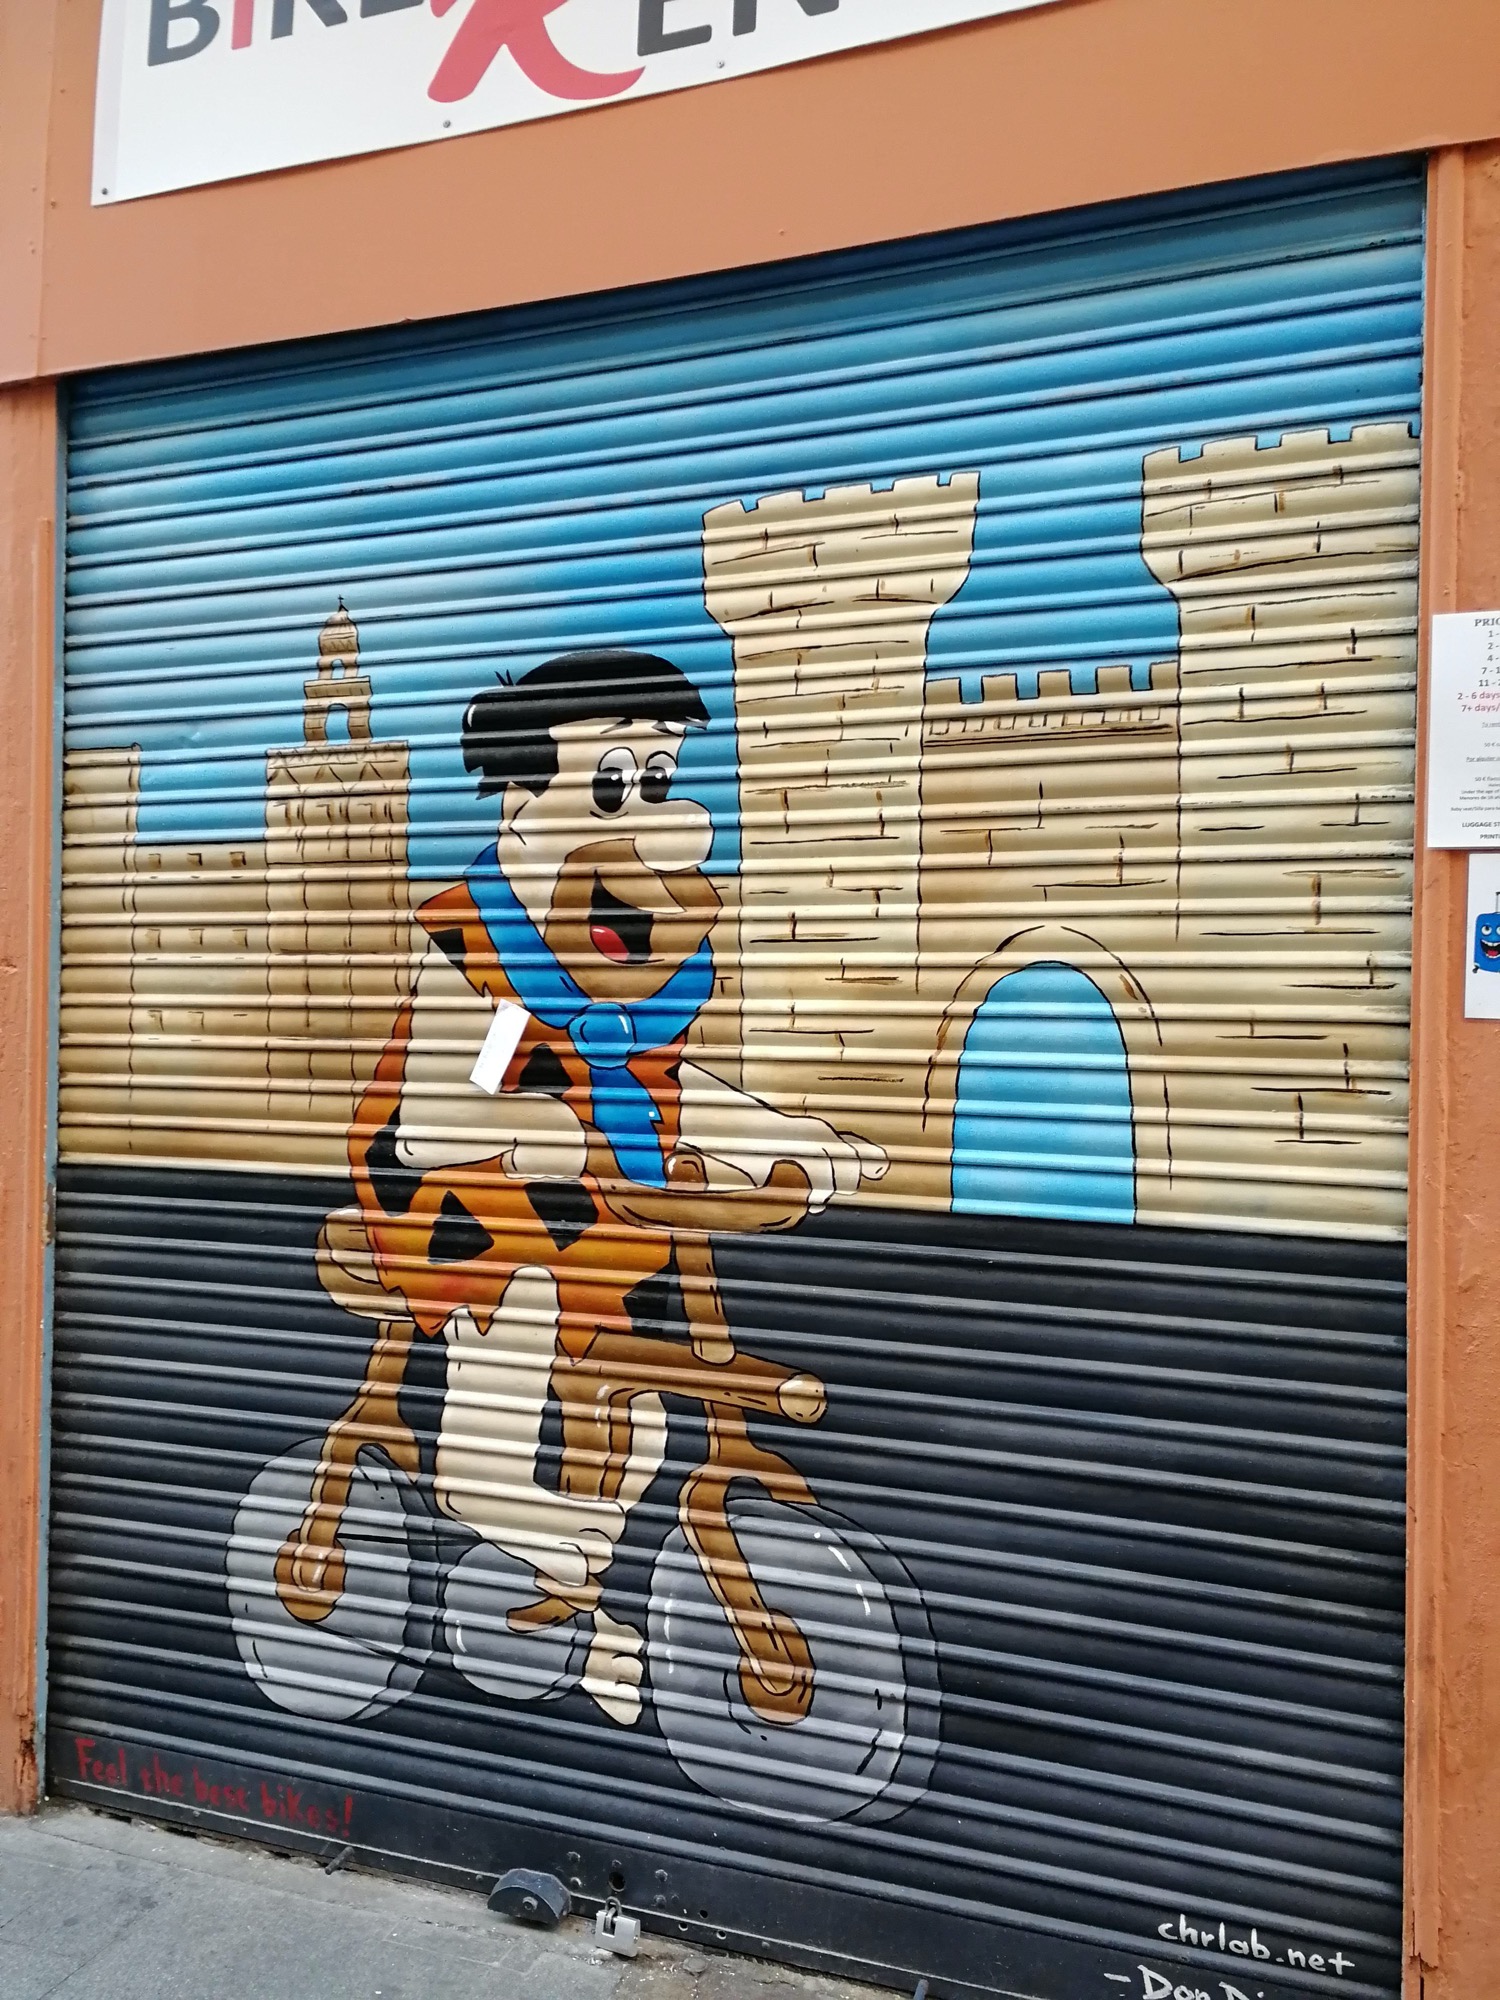 Graffiti 3591  captured by Rabot in València Spain